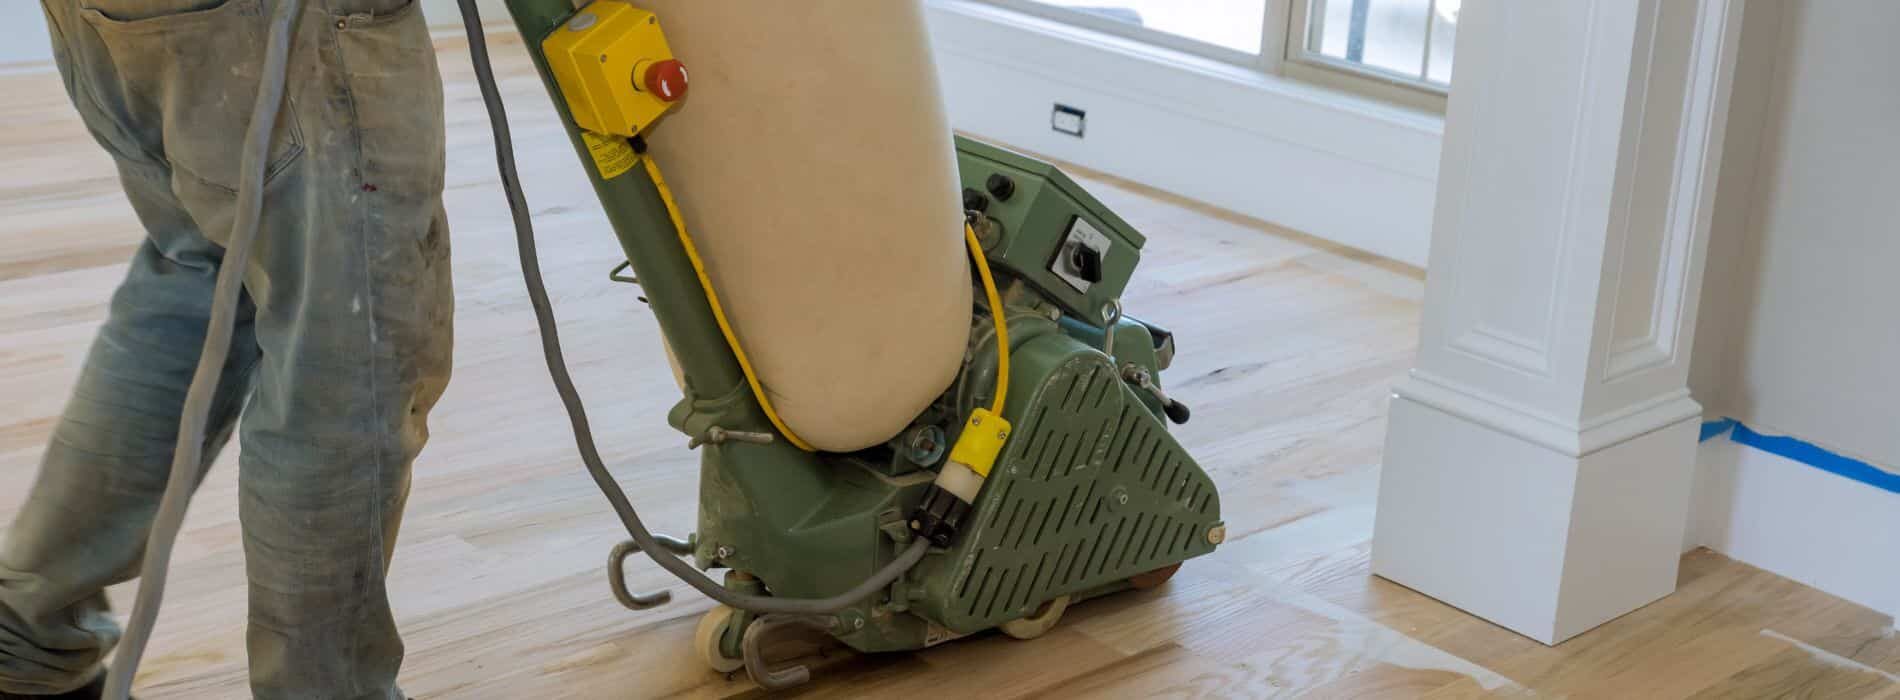 In Charlton, SE7, Mr Sander® are using a Bona Scorpion, a 200mm drum sander, to sand a parquet floor. This powerful machine operates at 1.5 kW and requires a voltage of 240V and a frequency of 50Hz. Connected to a dust extraction system featuring a HEPA filter for a clean and efficient result.